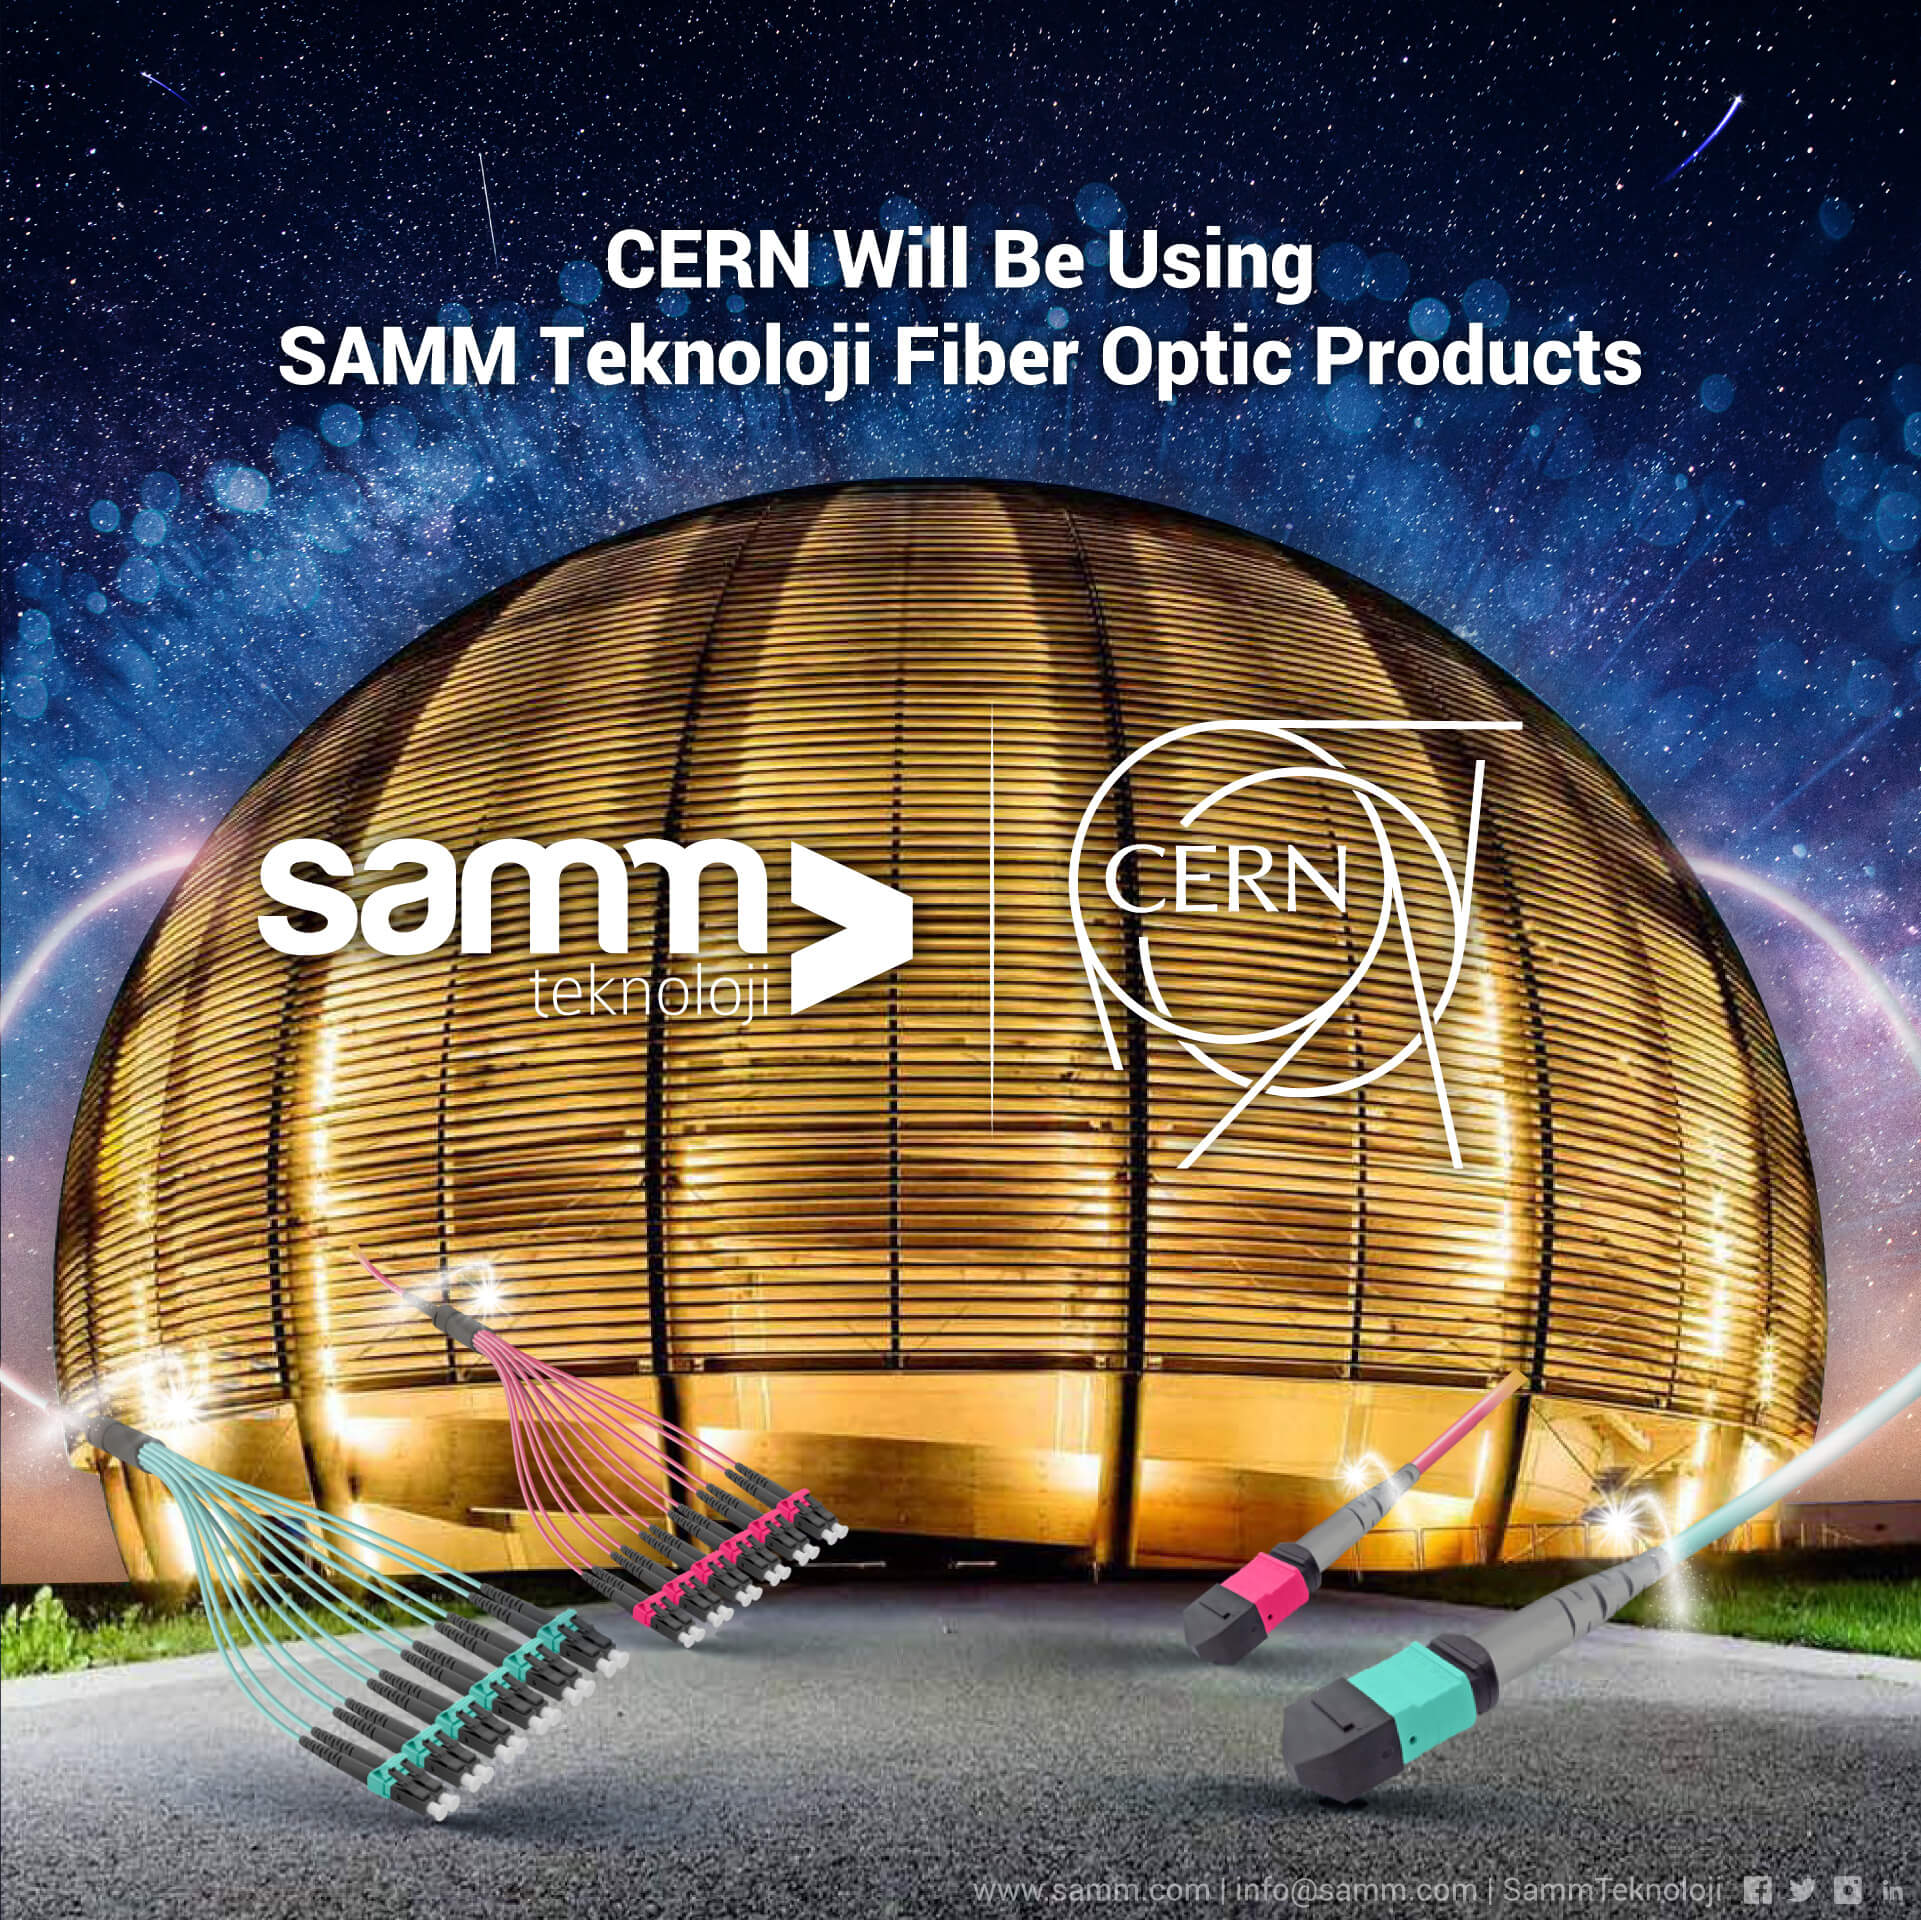 SAMM Signs a Contract with CERN for Fiber Optic Cables and Accessories